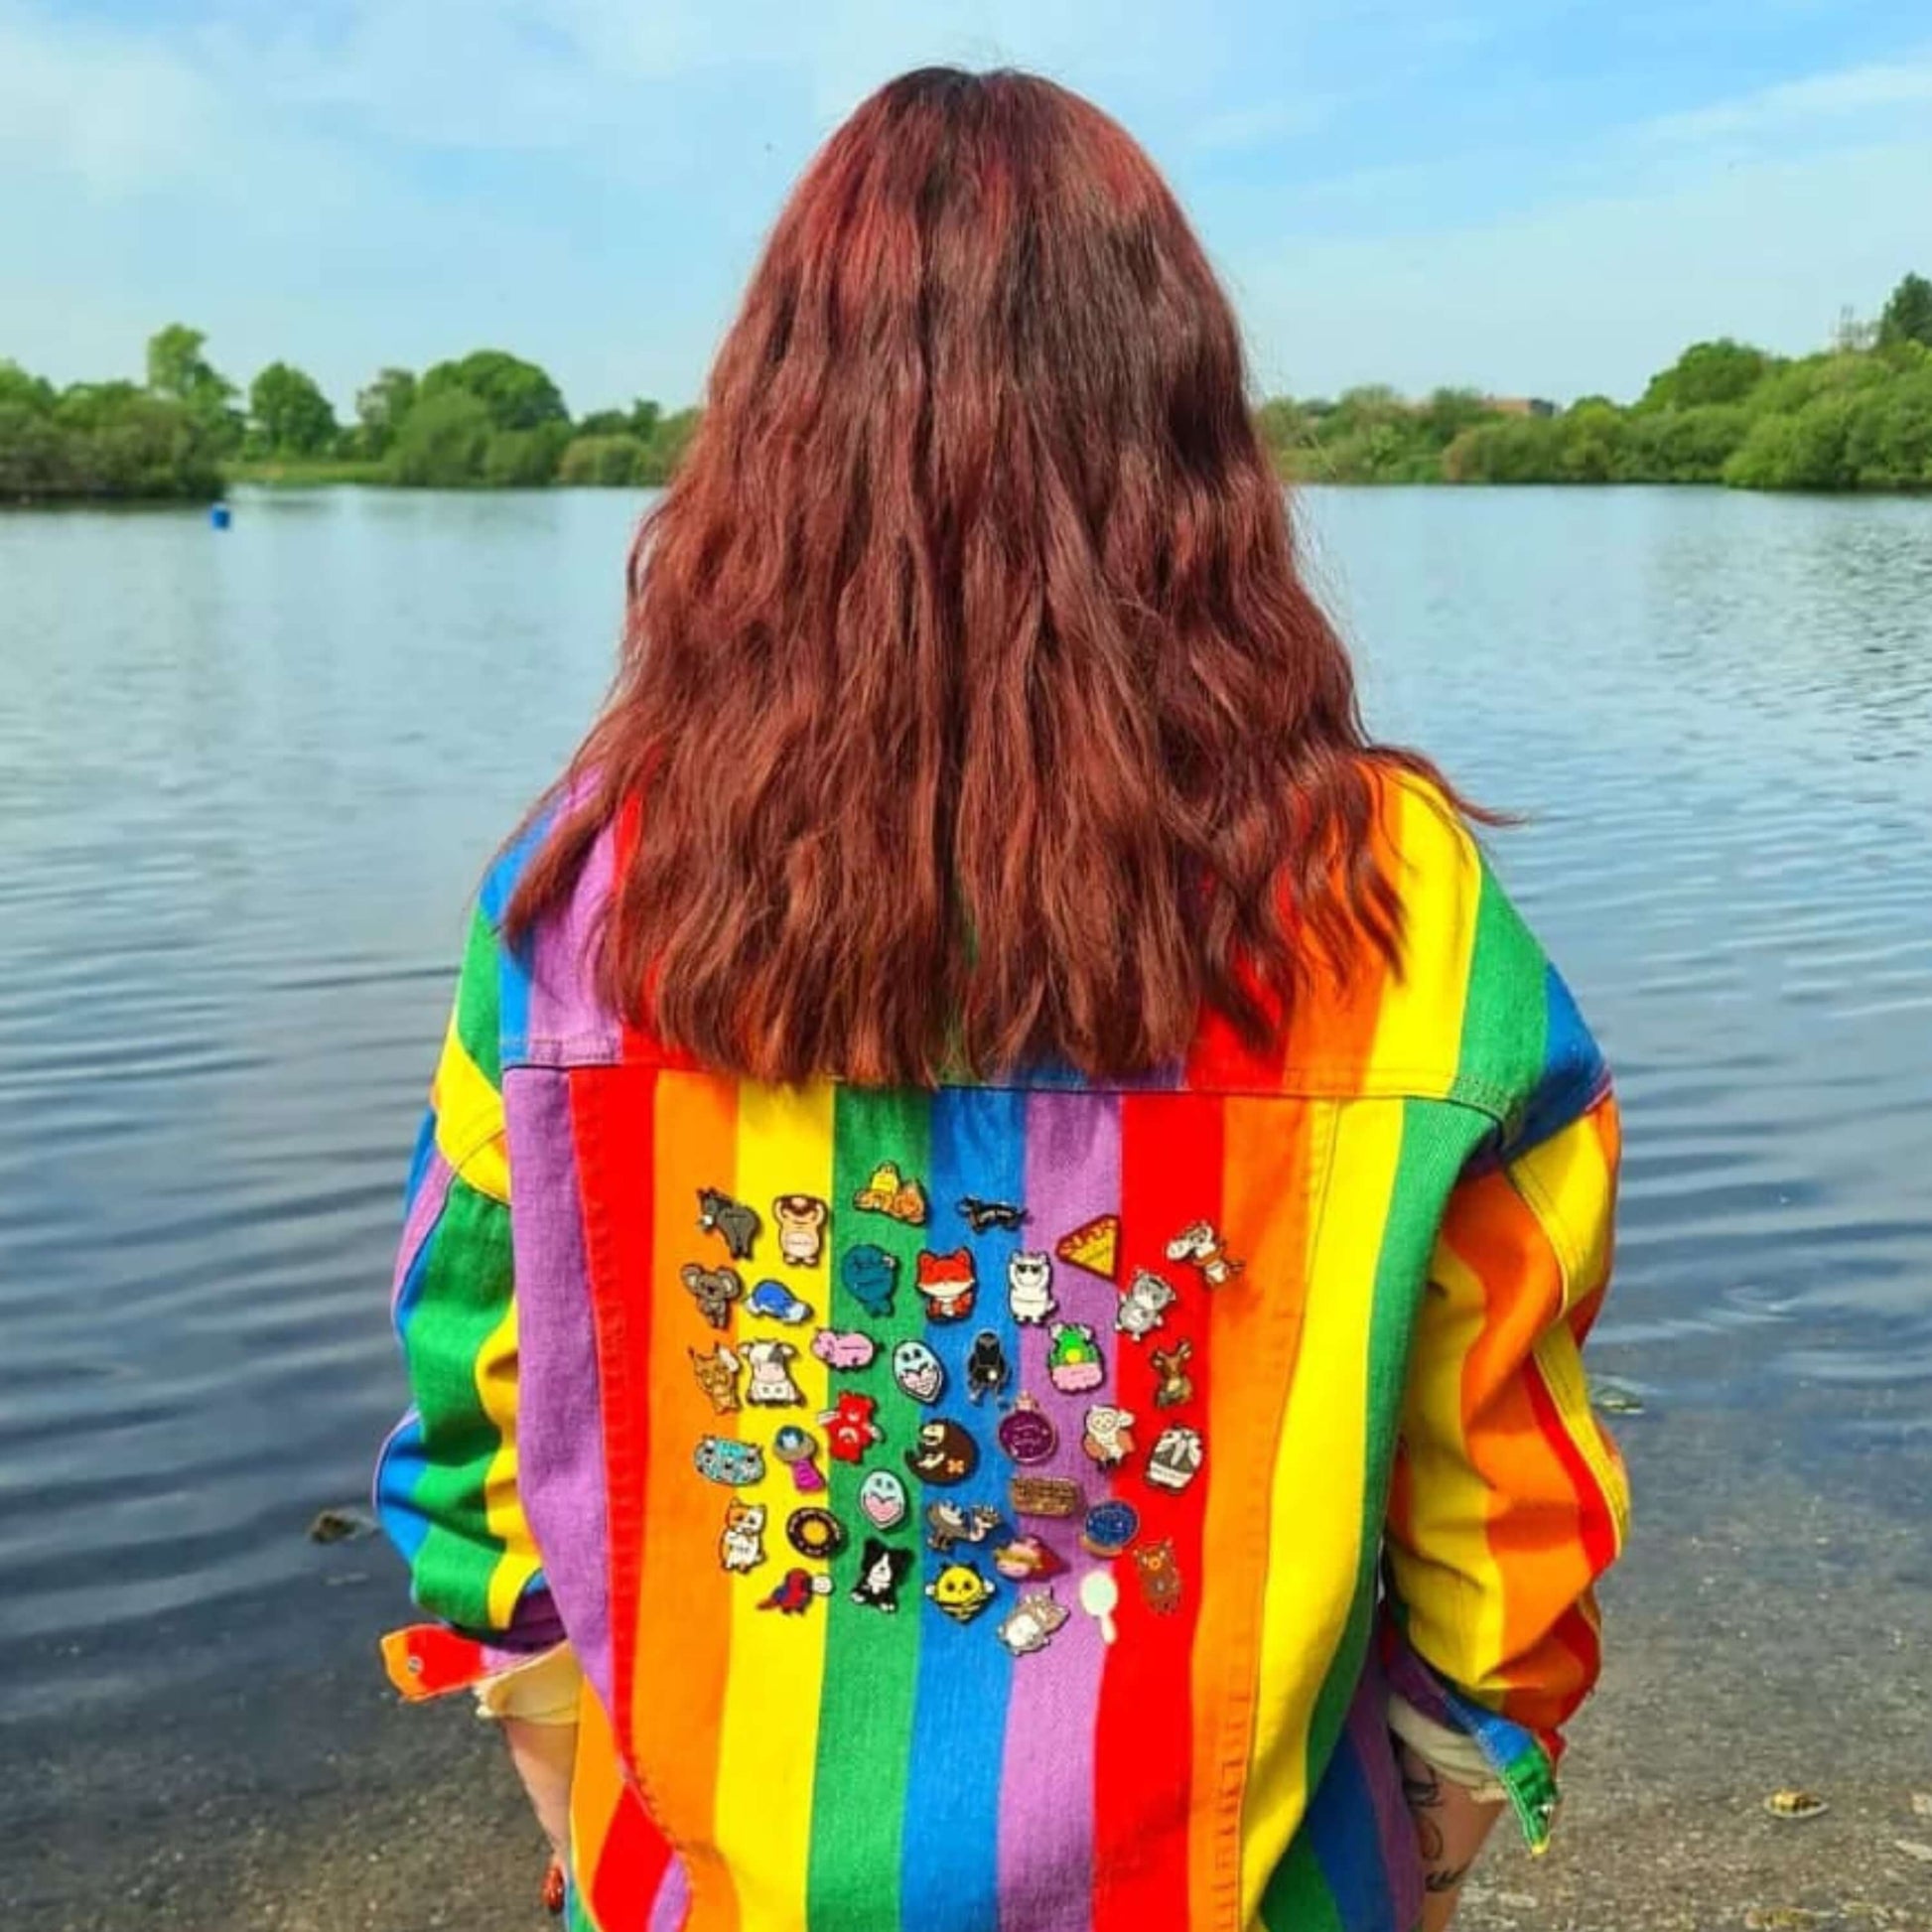 Nikky, the owner of Innabox, with brown mid length hair facing away from the camera looking out to a lake. She is wearing a rainbow denim jacket with the back full of the innabox enamel pins raising awareness for hidden disabilities and invisible illnesses.